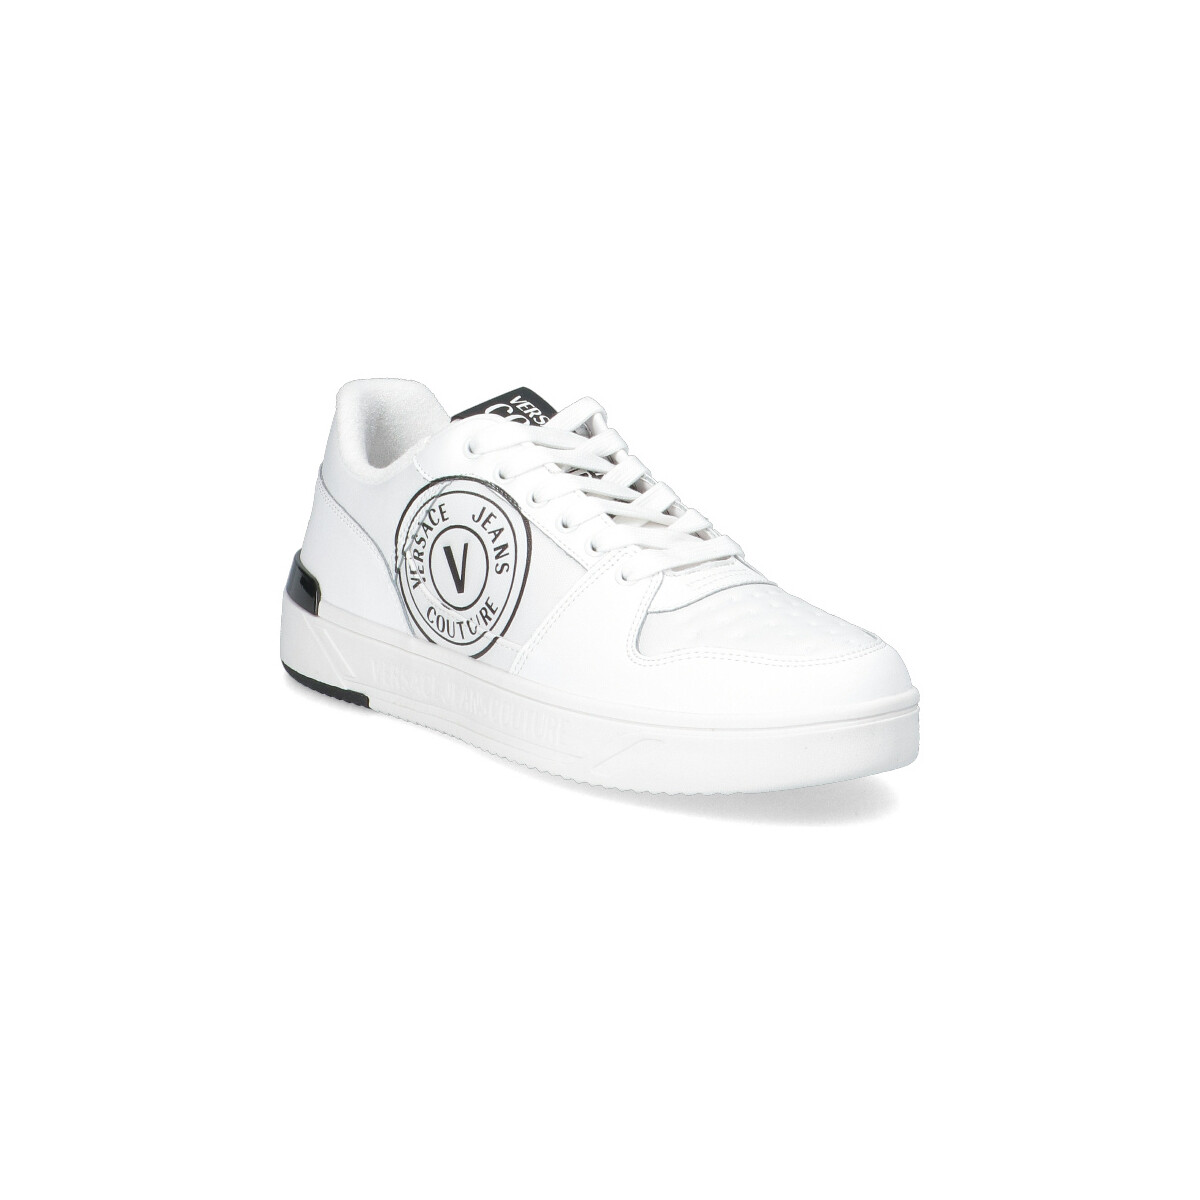 Versace Jeans Couture Sneaker Uomo aTLIwHS2